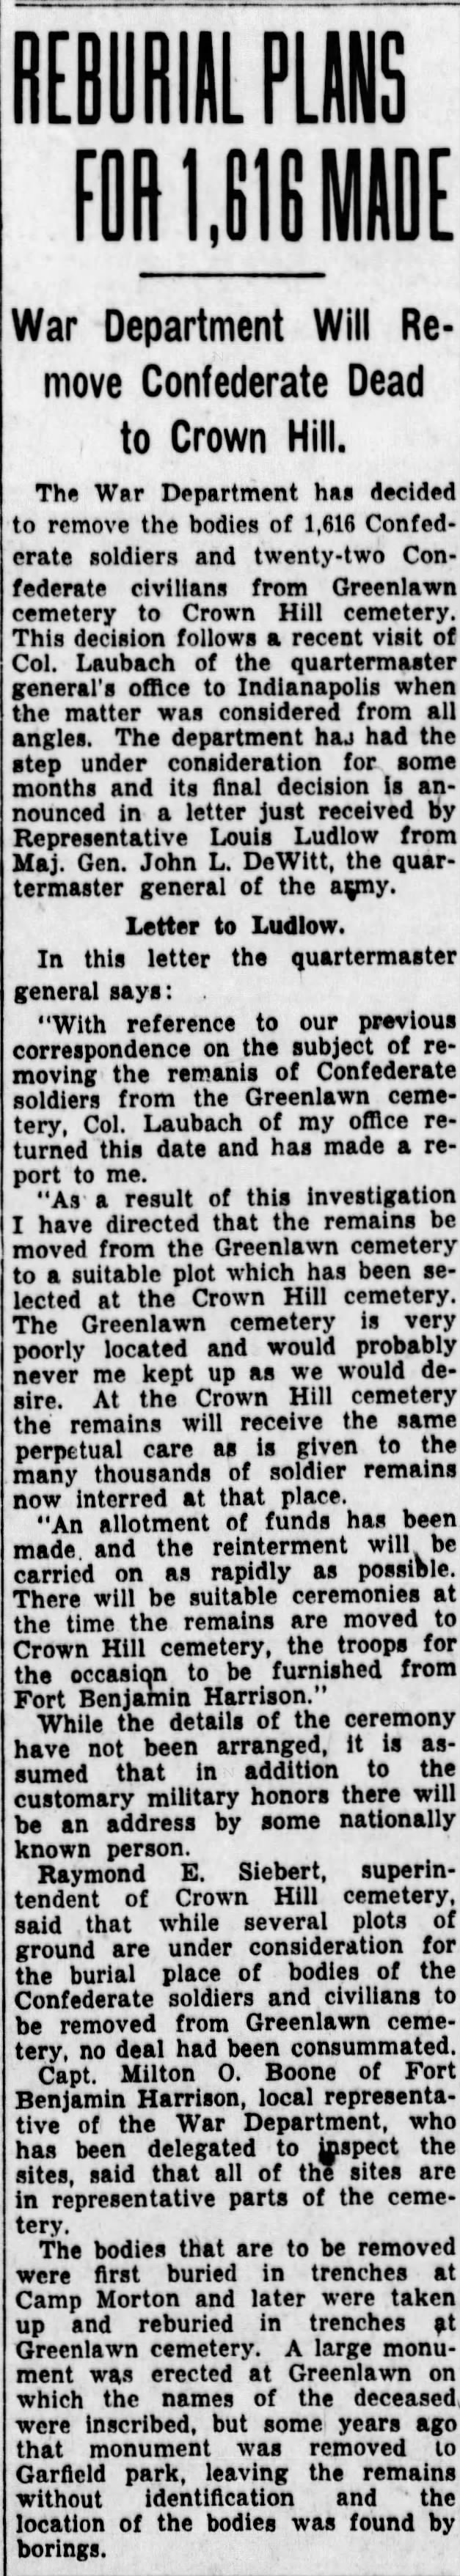 "Reburial Plans Made for 1,616 Made"; IndyStar; Sept 29, 1931